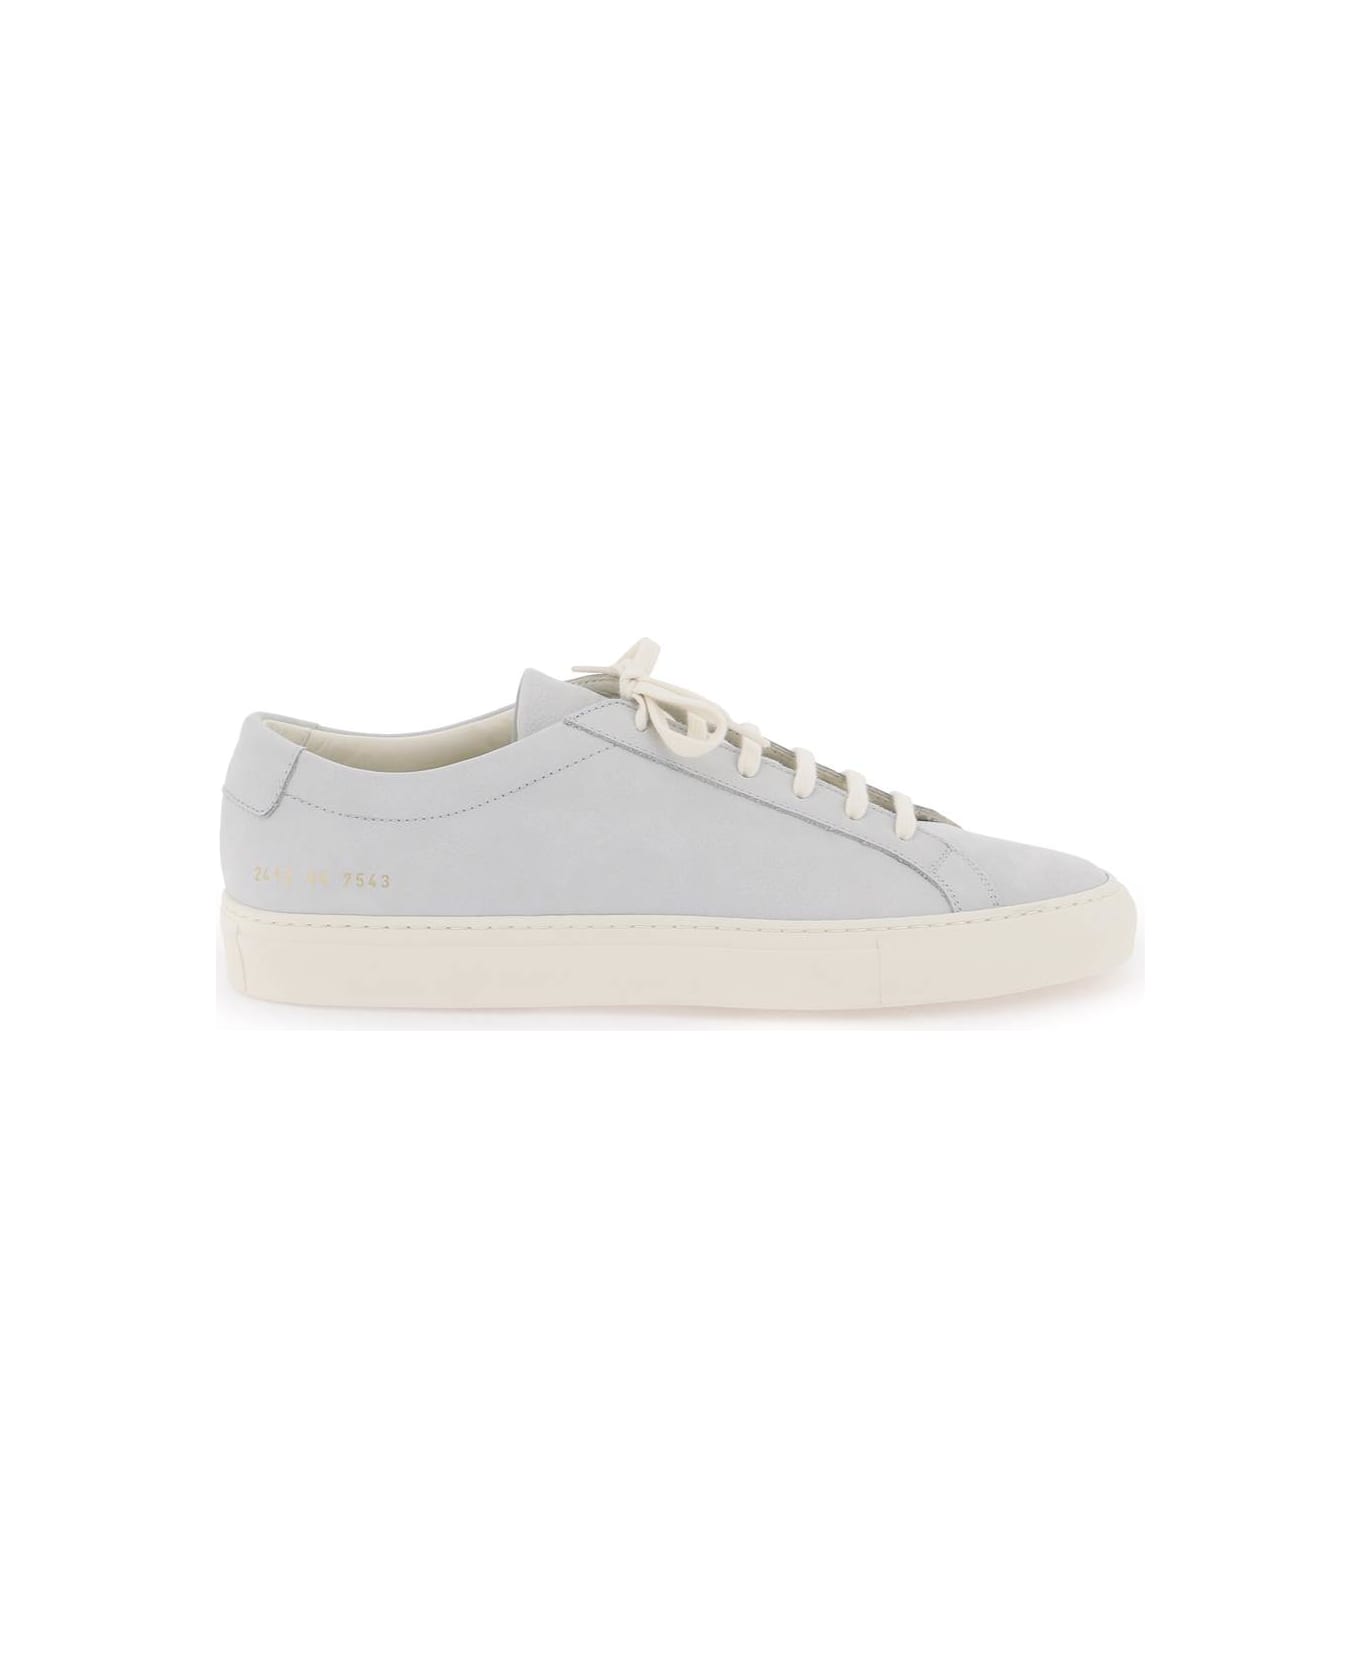 Common Projects Original Achilles Leather Sneakers - GREY